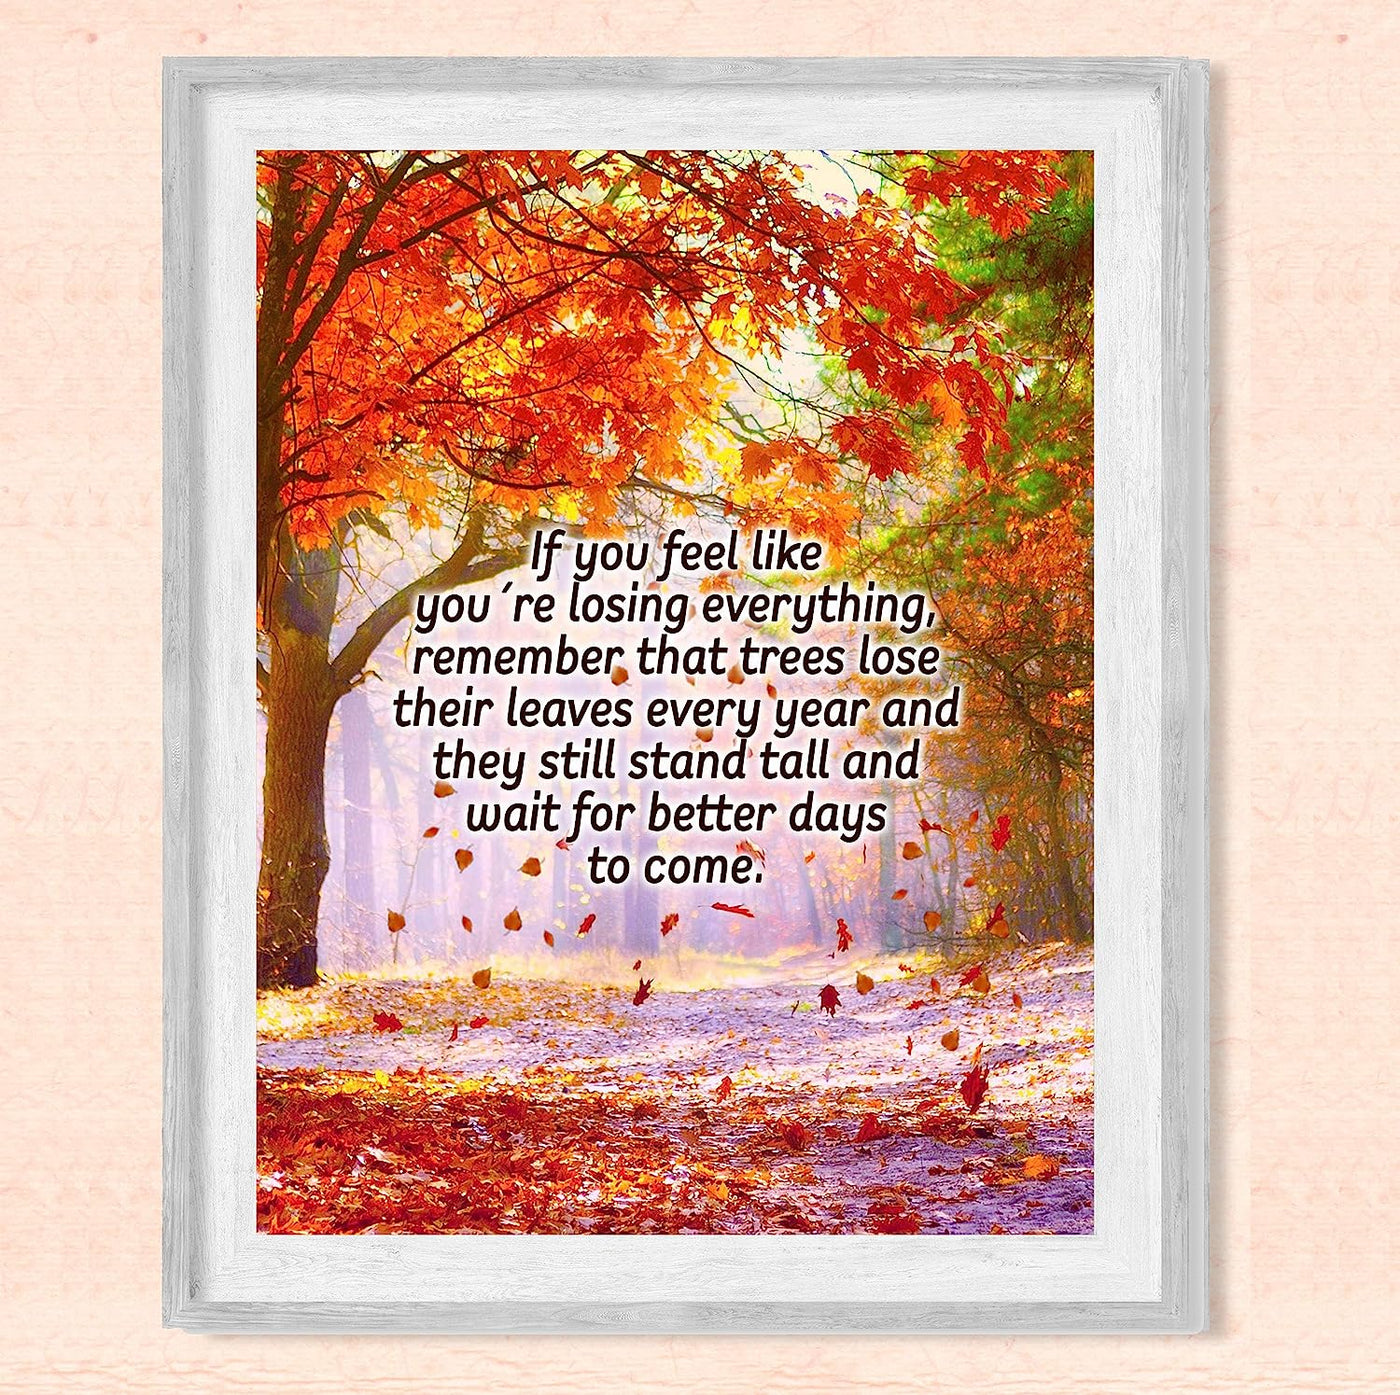 Remember Trees Lose Leaves-Still Stand Tall Inspirational Wall Art-8 x 10" Scenic Fall Print w/Autumn Leaves-Ready to Frame. Motivational Home-Office-School-Farmhouse Decor! Great for Inspiration!